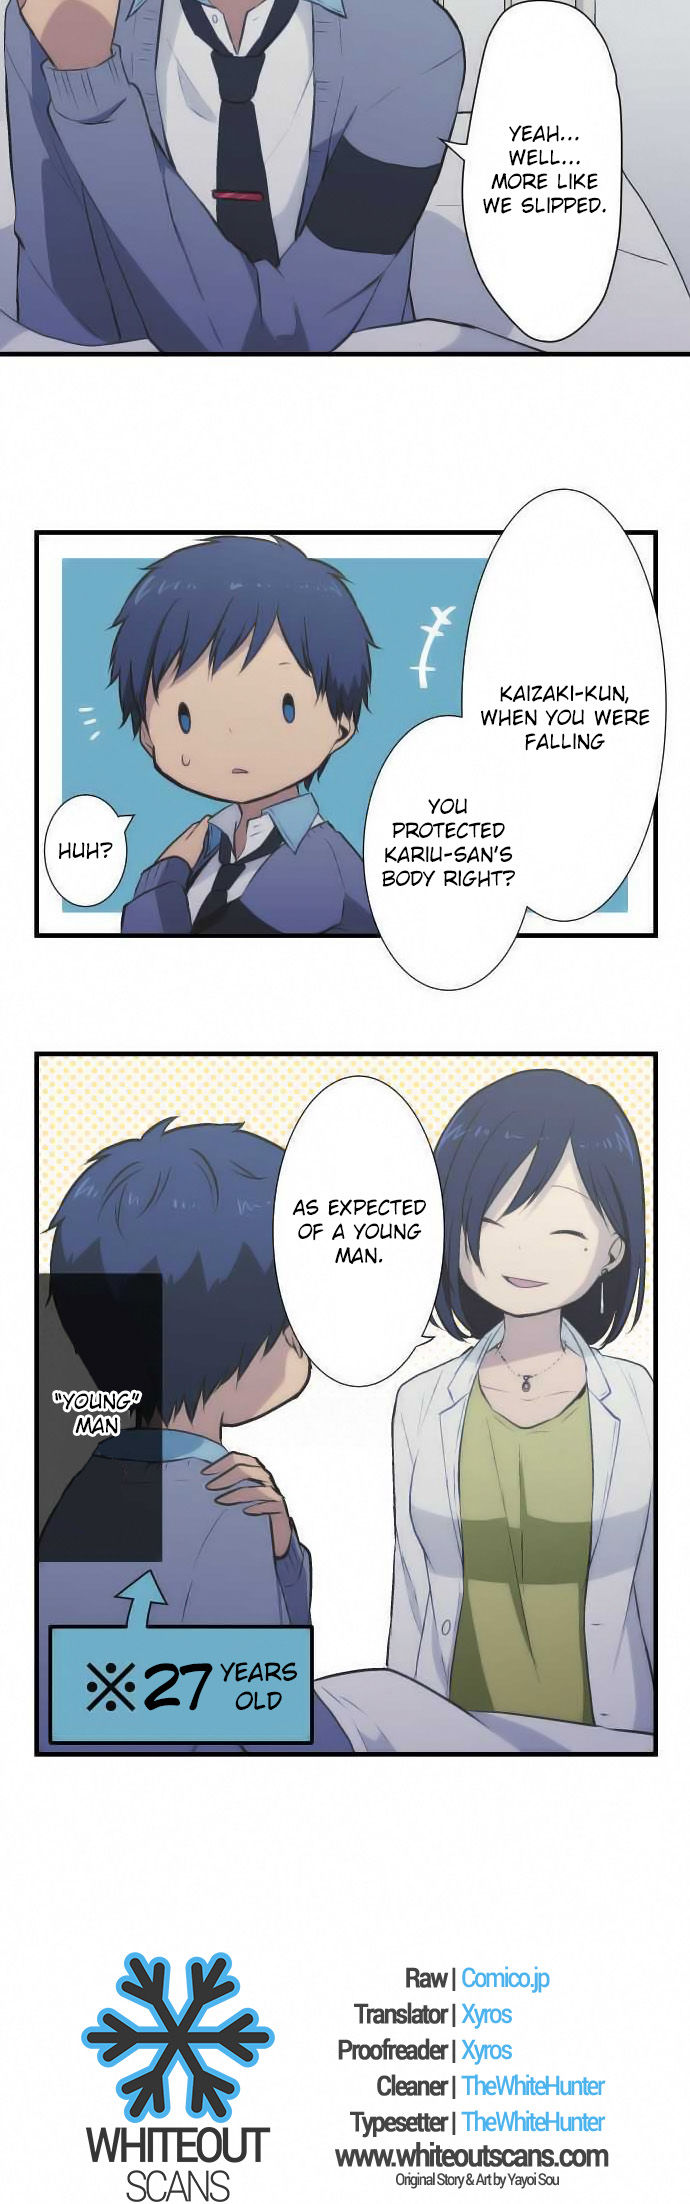 ReLIFE 38